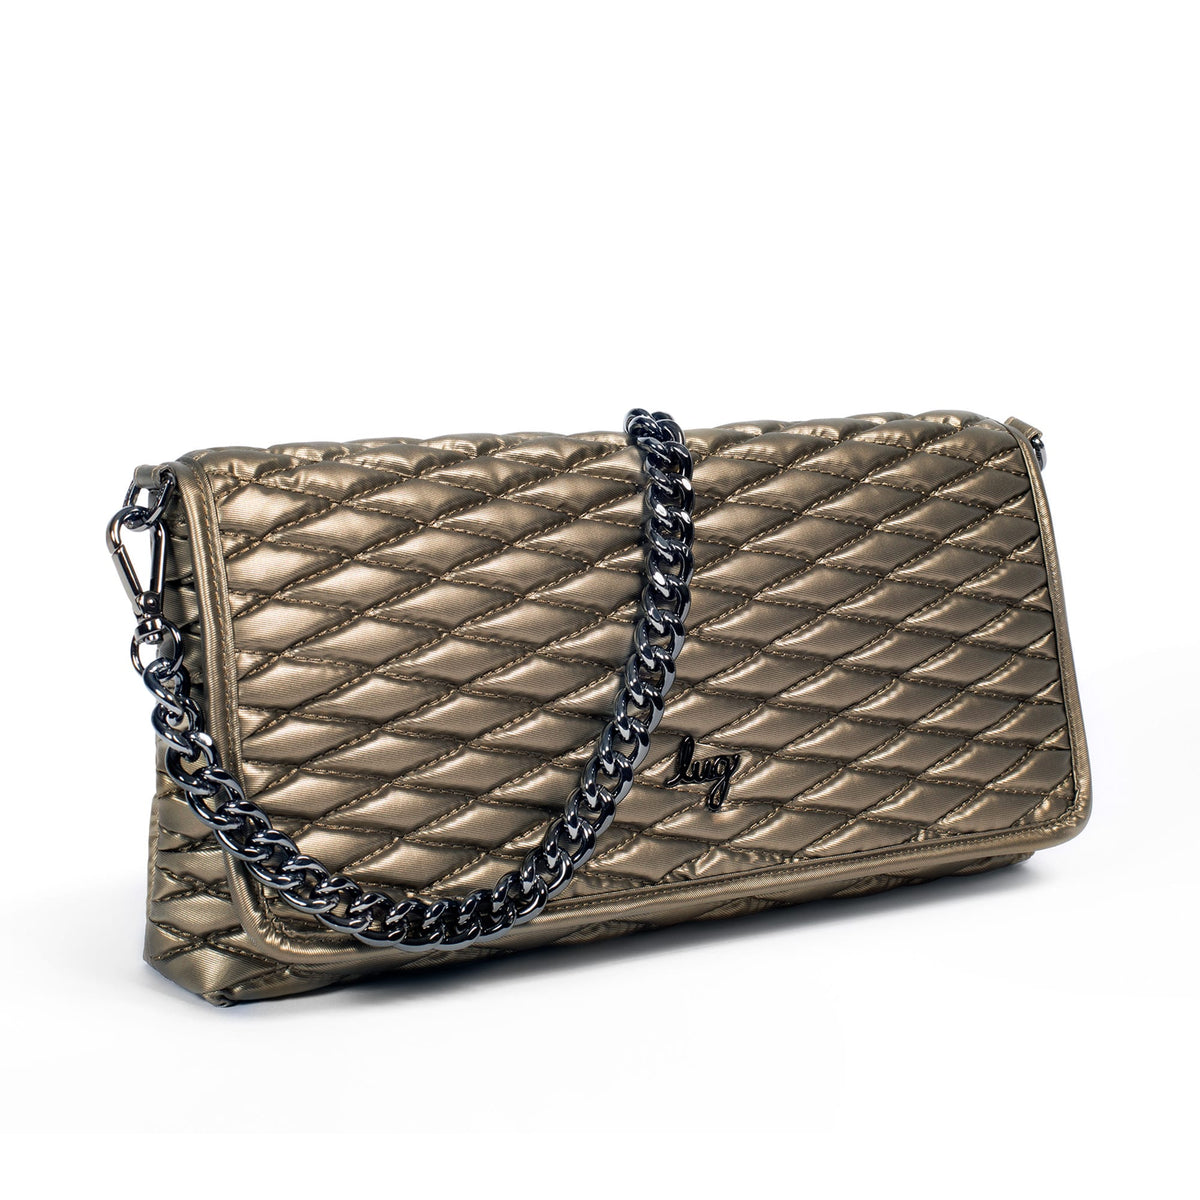 Quilted Texture Clutch Bag with Silver Chain Shoulder Strap for Women  Travel Organization